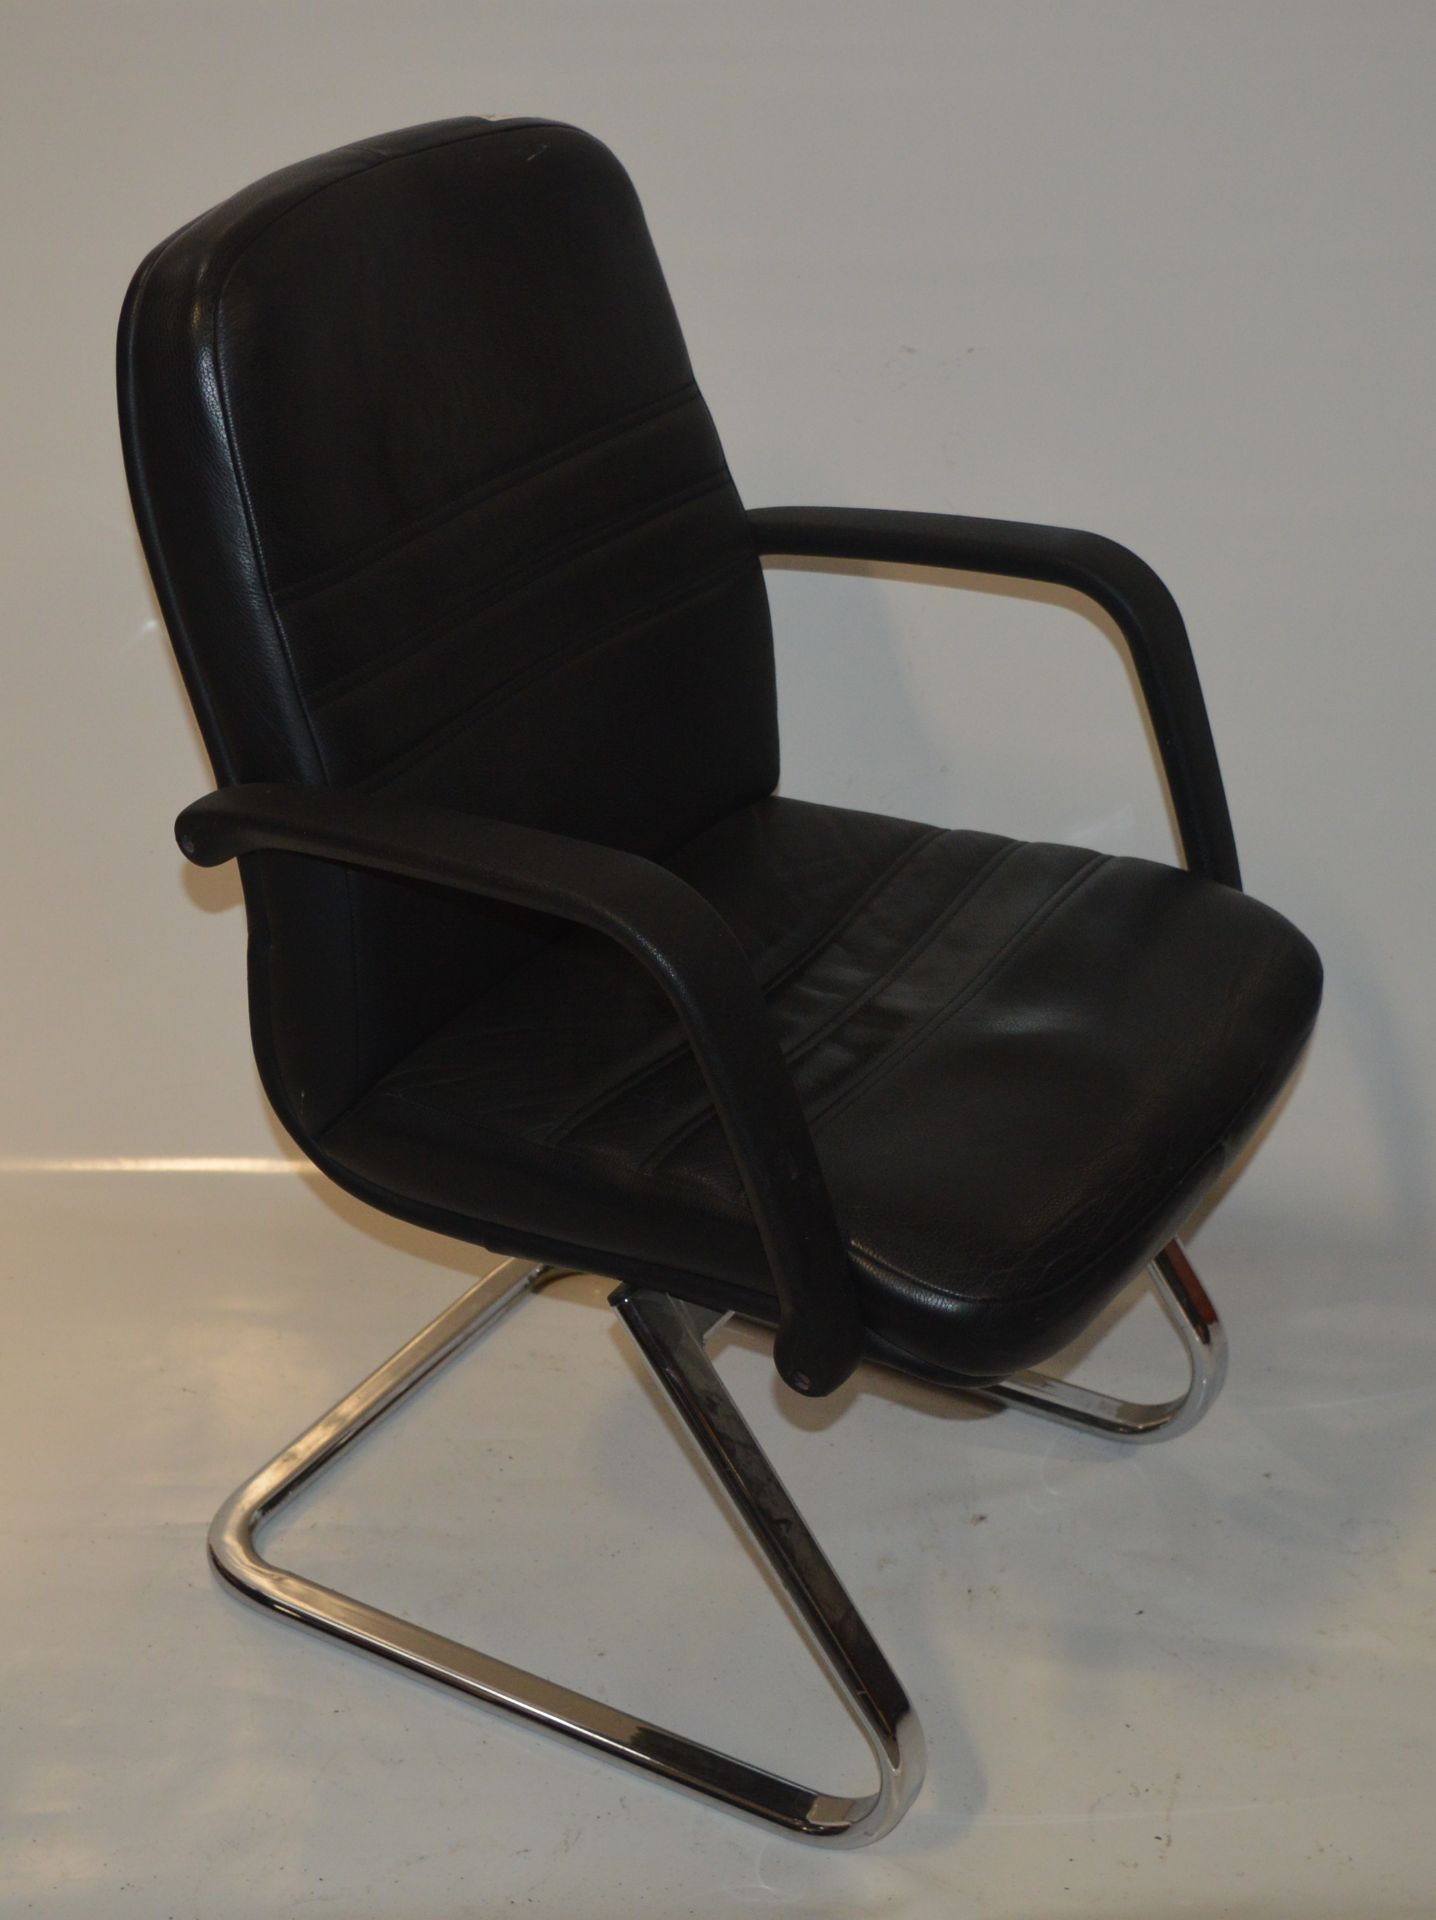 1 x Black Leather Office Chair With Chrome Base - Ref JP177 - Removed From Office Environment - - Image 3 of 4